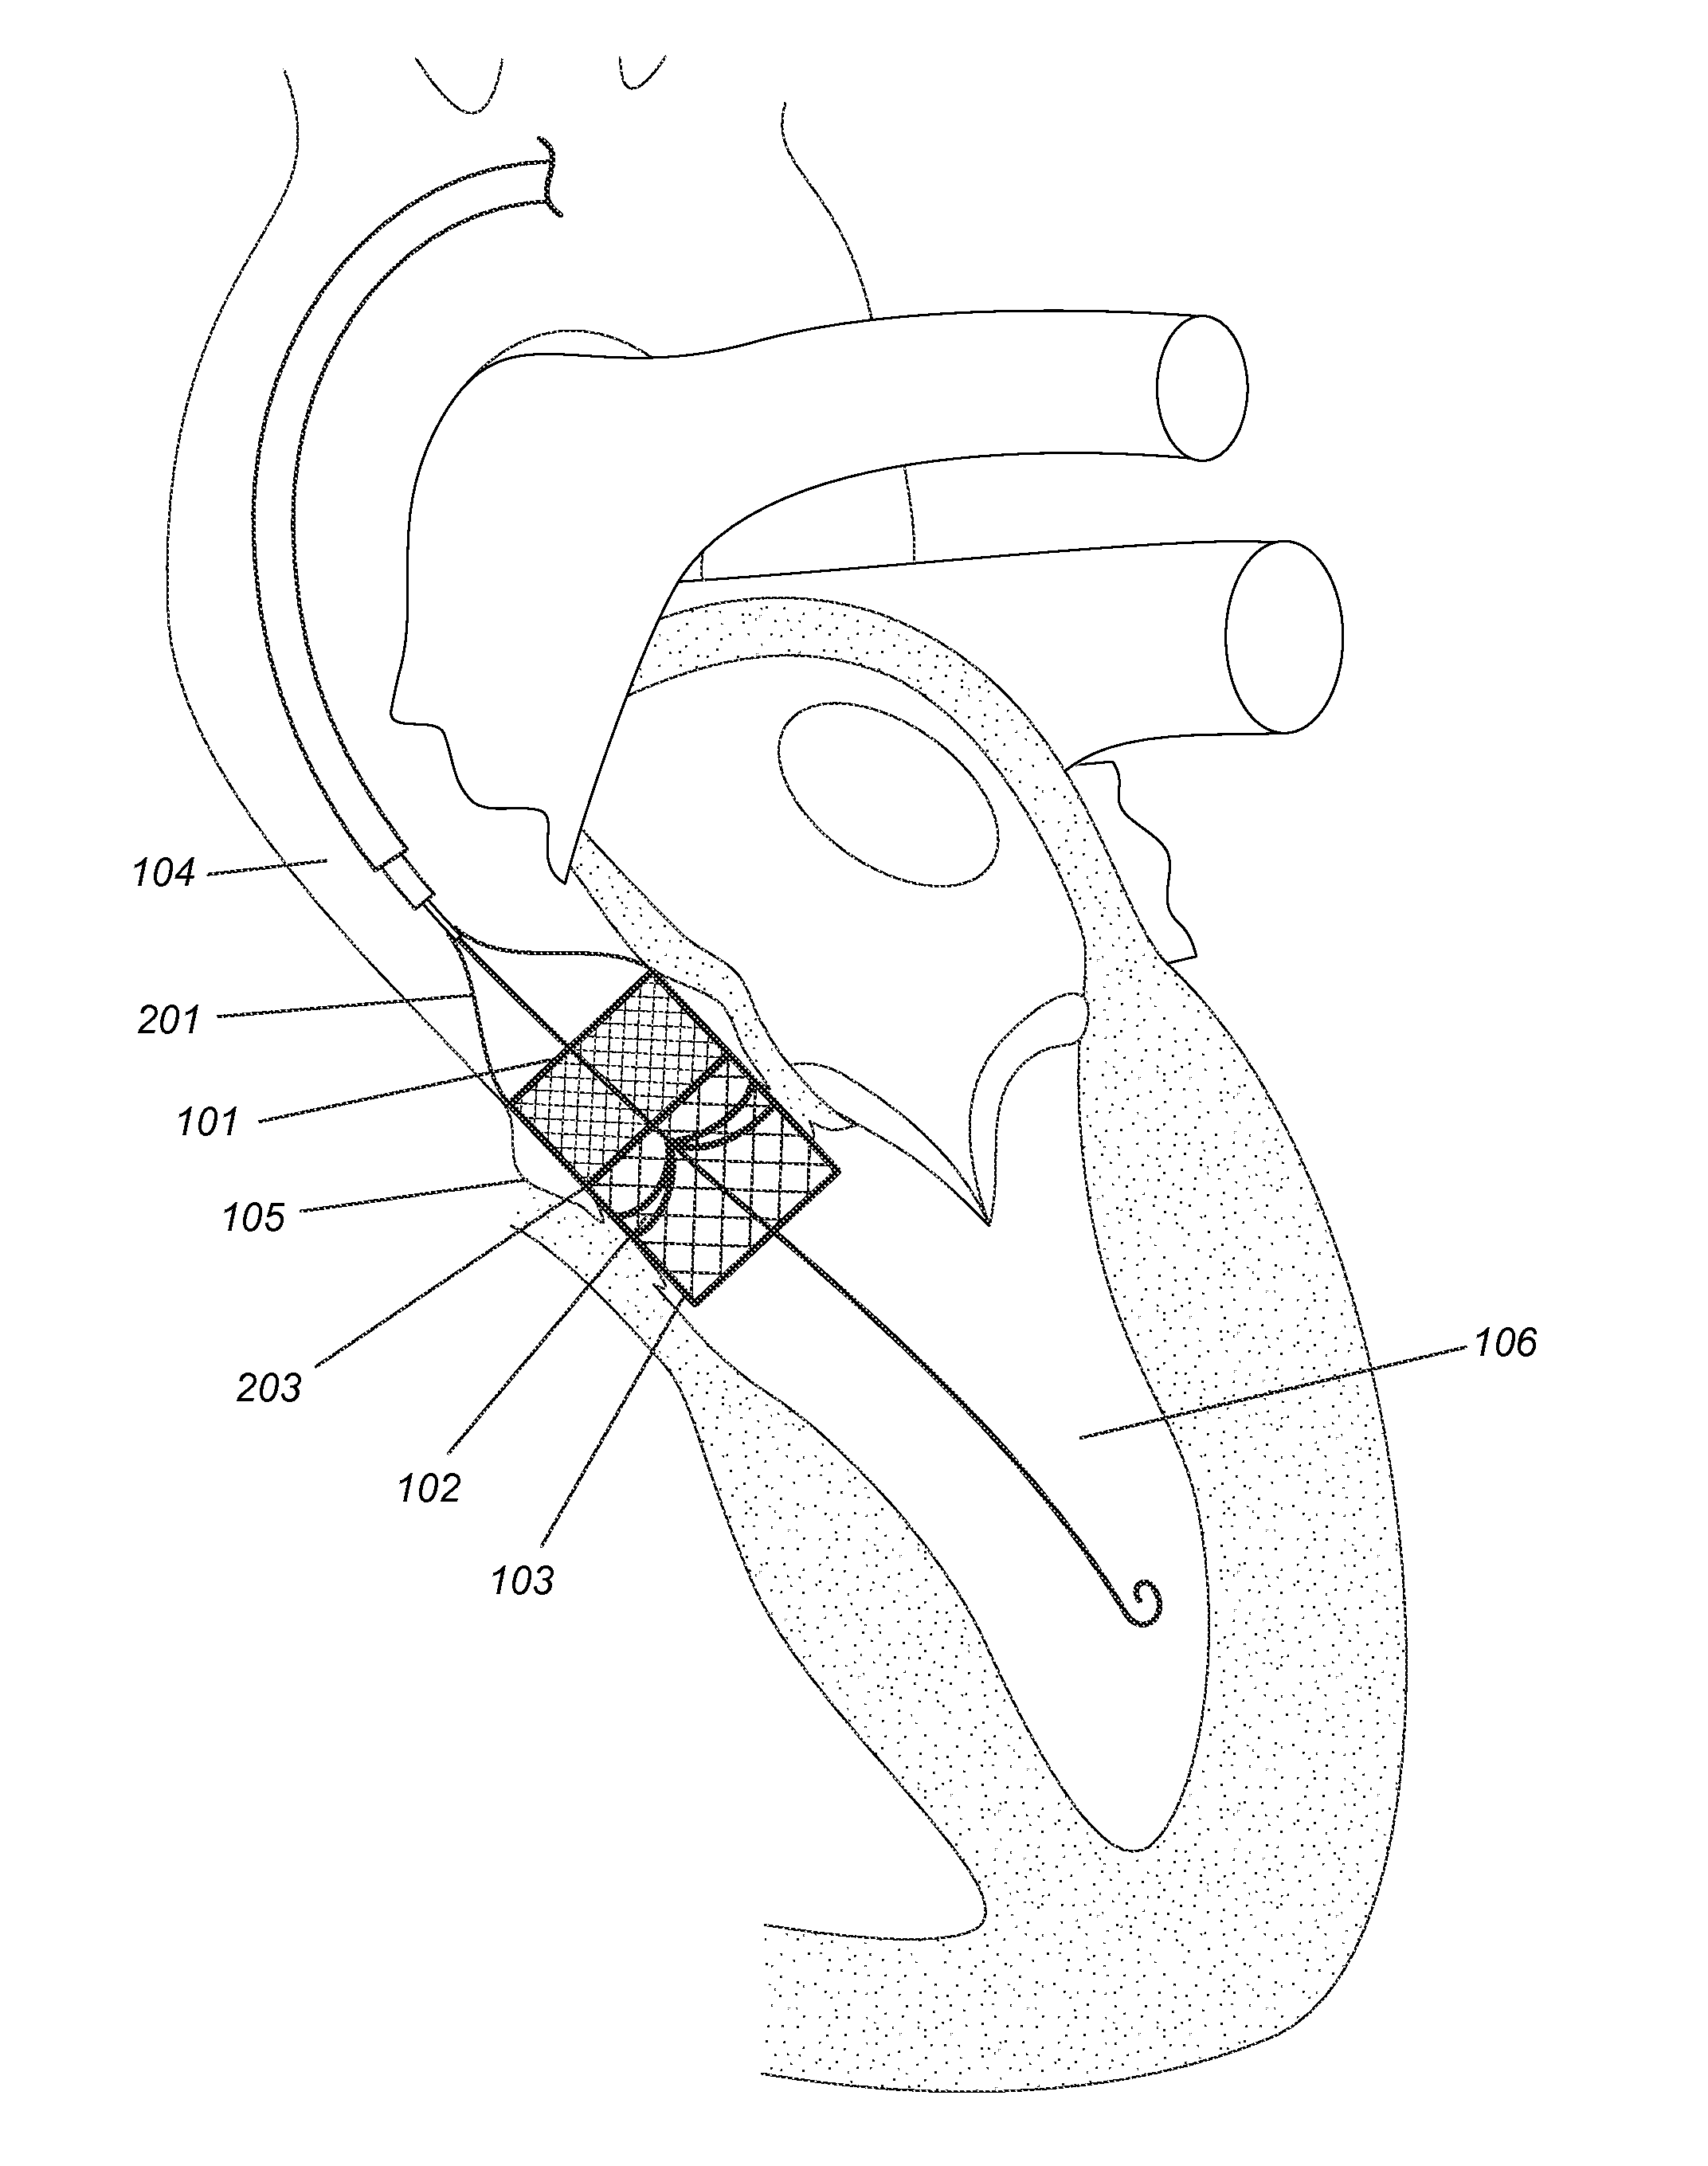 Modular dis-assembly of transcatheter valve replacement devices and uses thereof